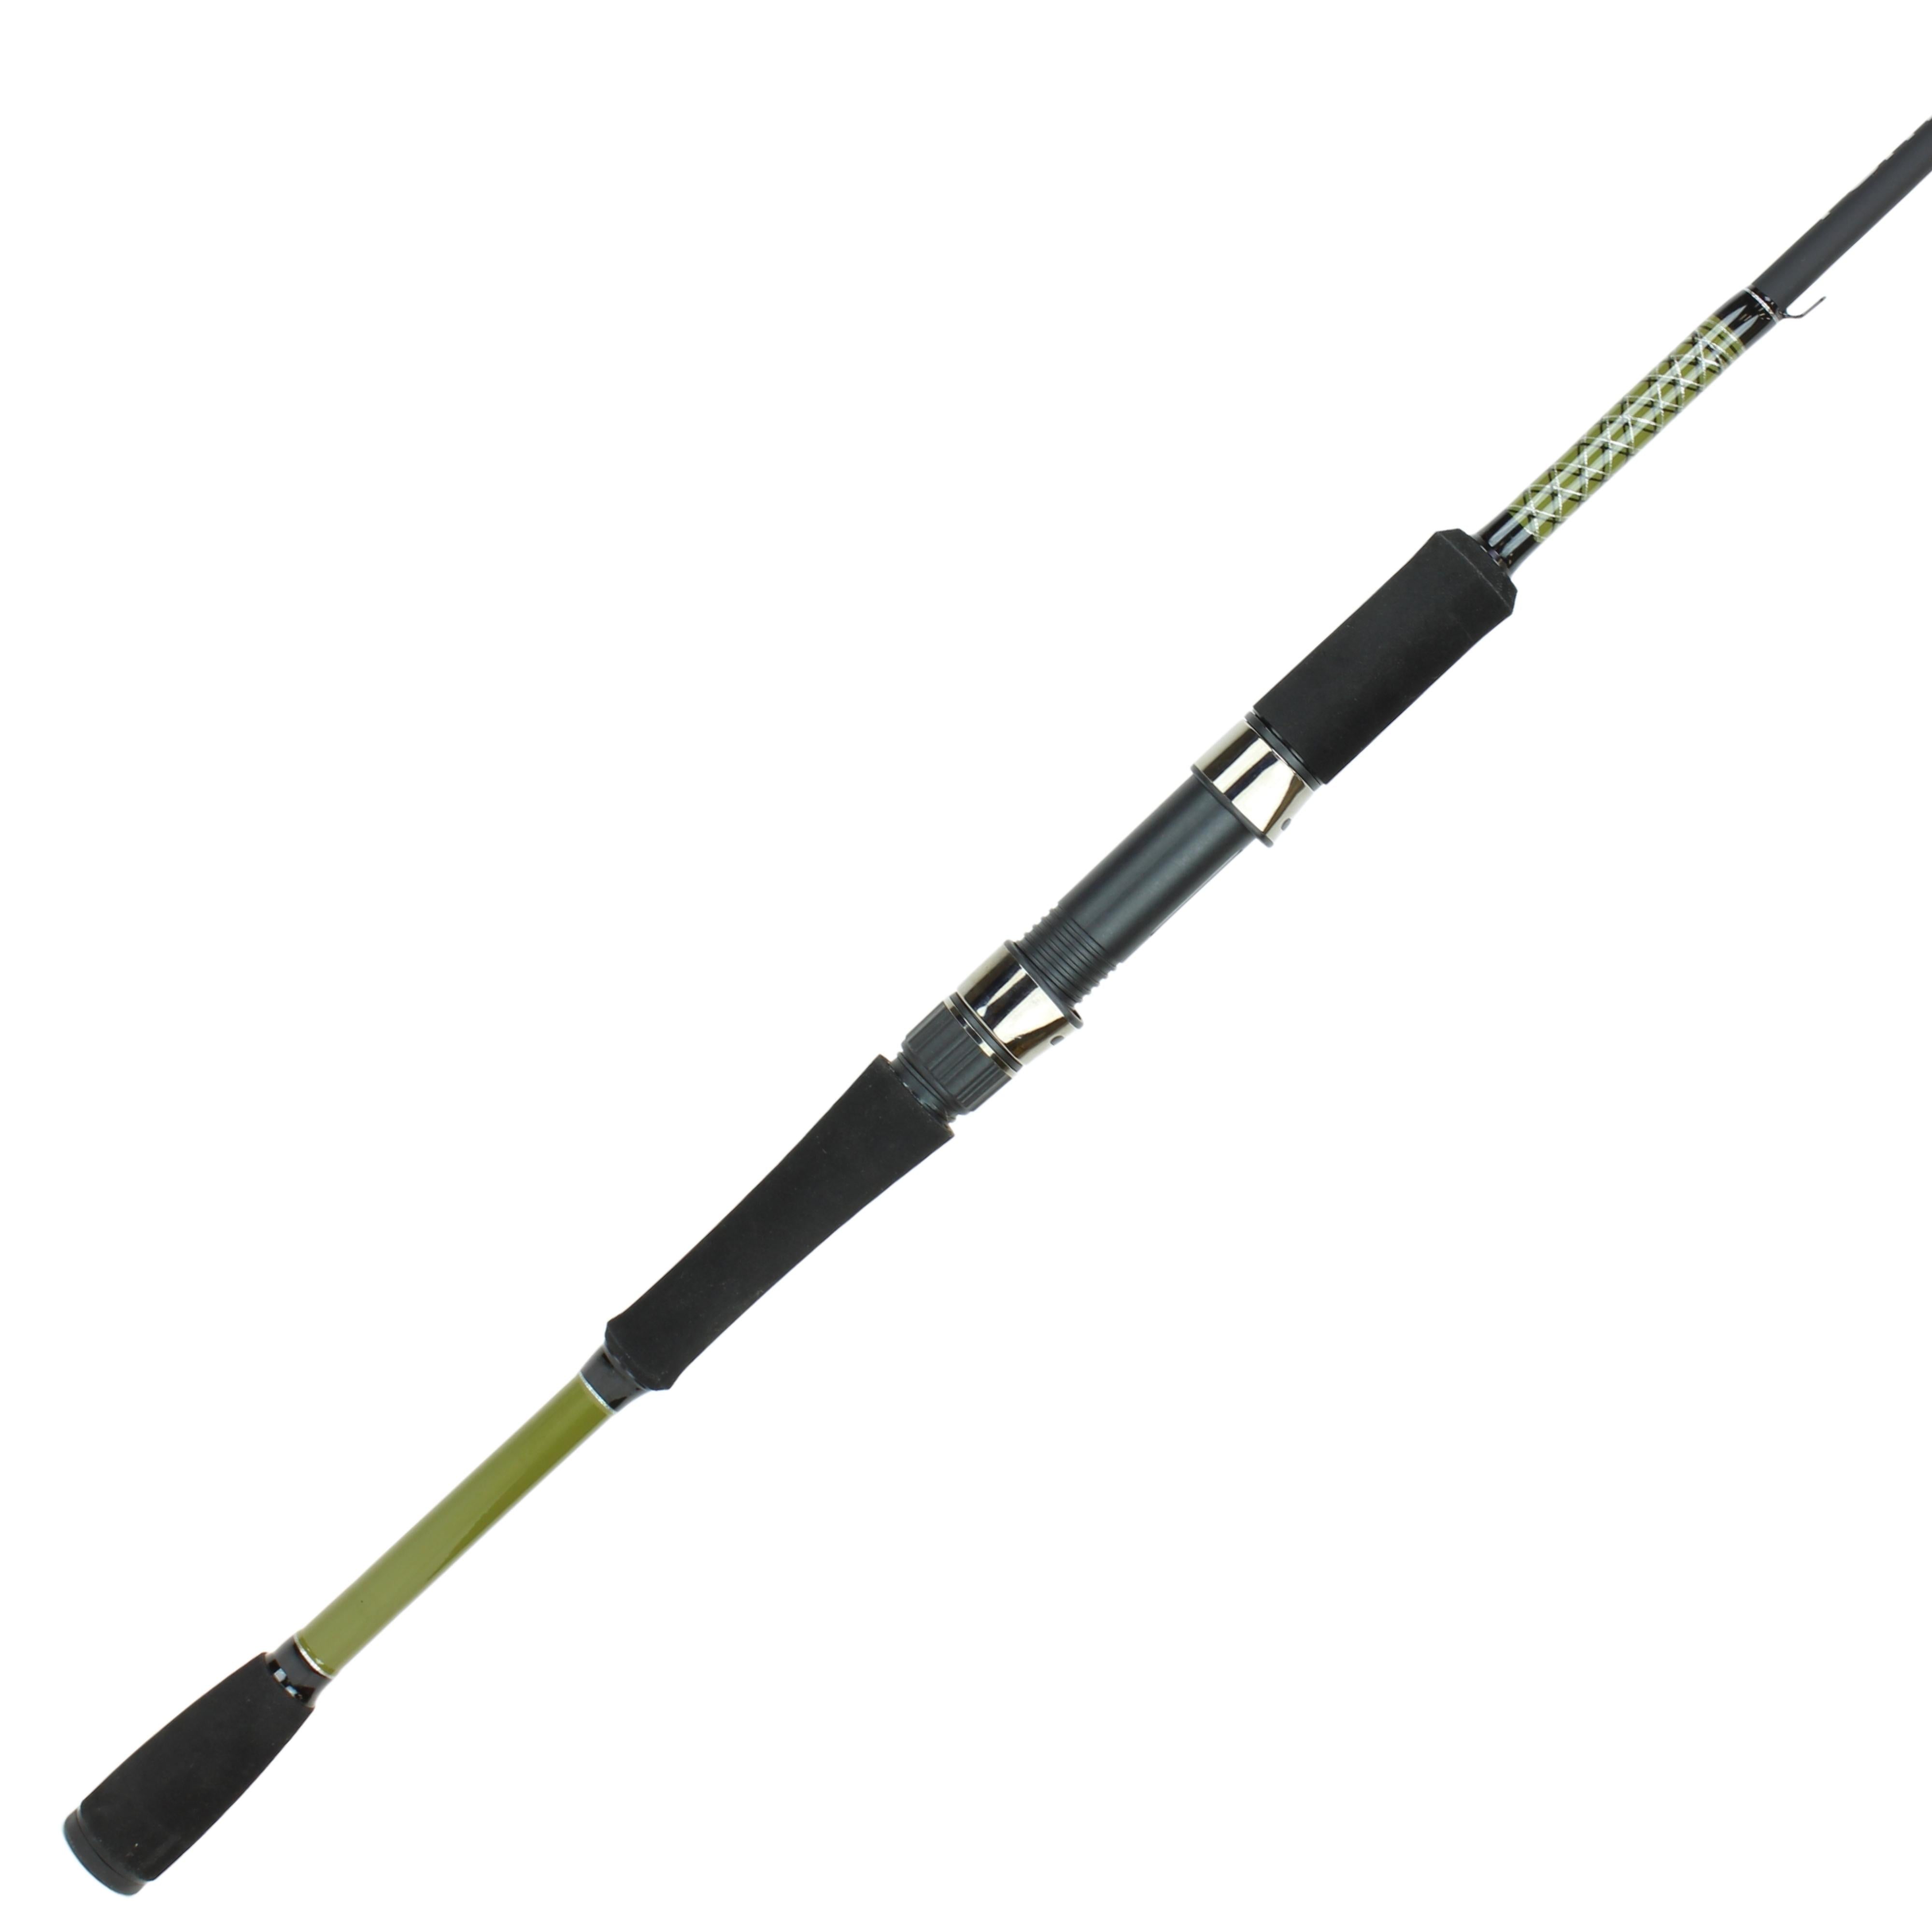 FORTIS 6' 6" Medium Heavy Action 1 Piece Spinning Rod and 4000 Spinning Reel Package (FSP661MH)